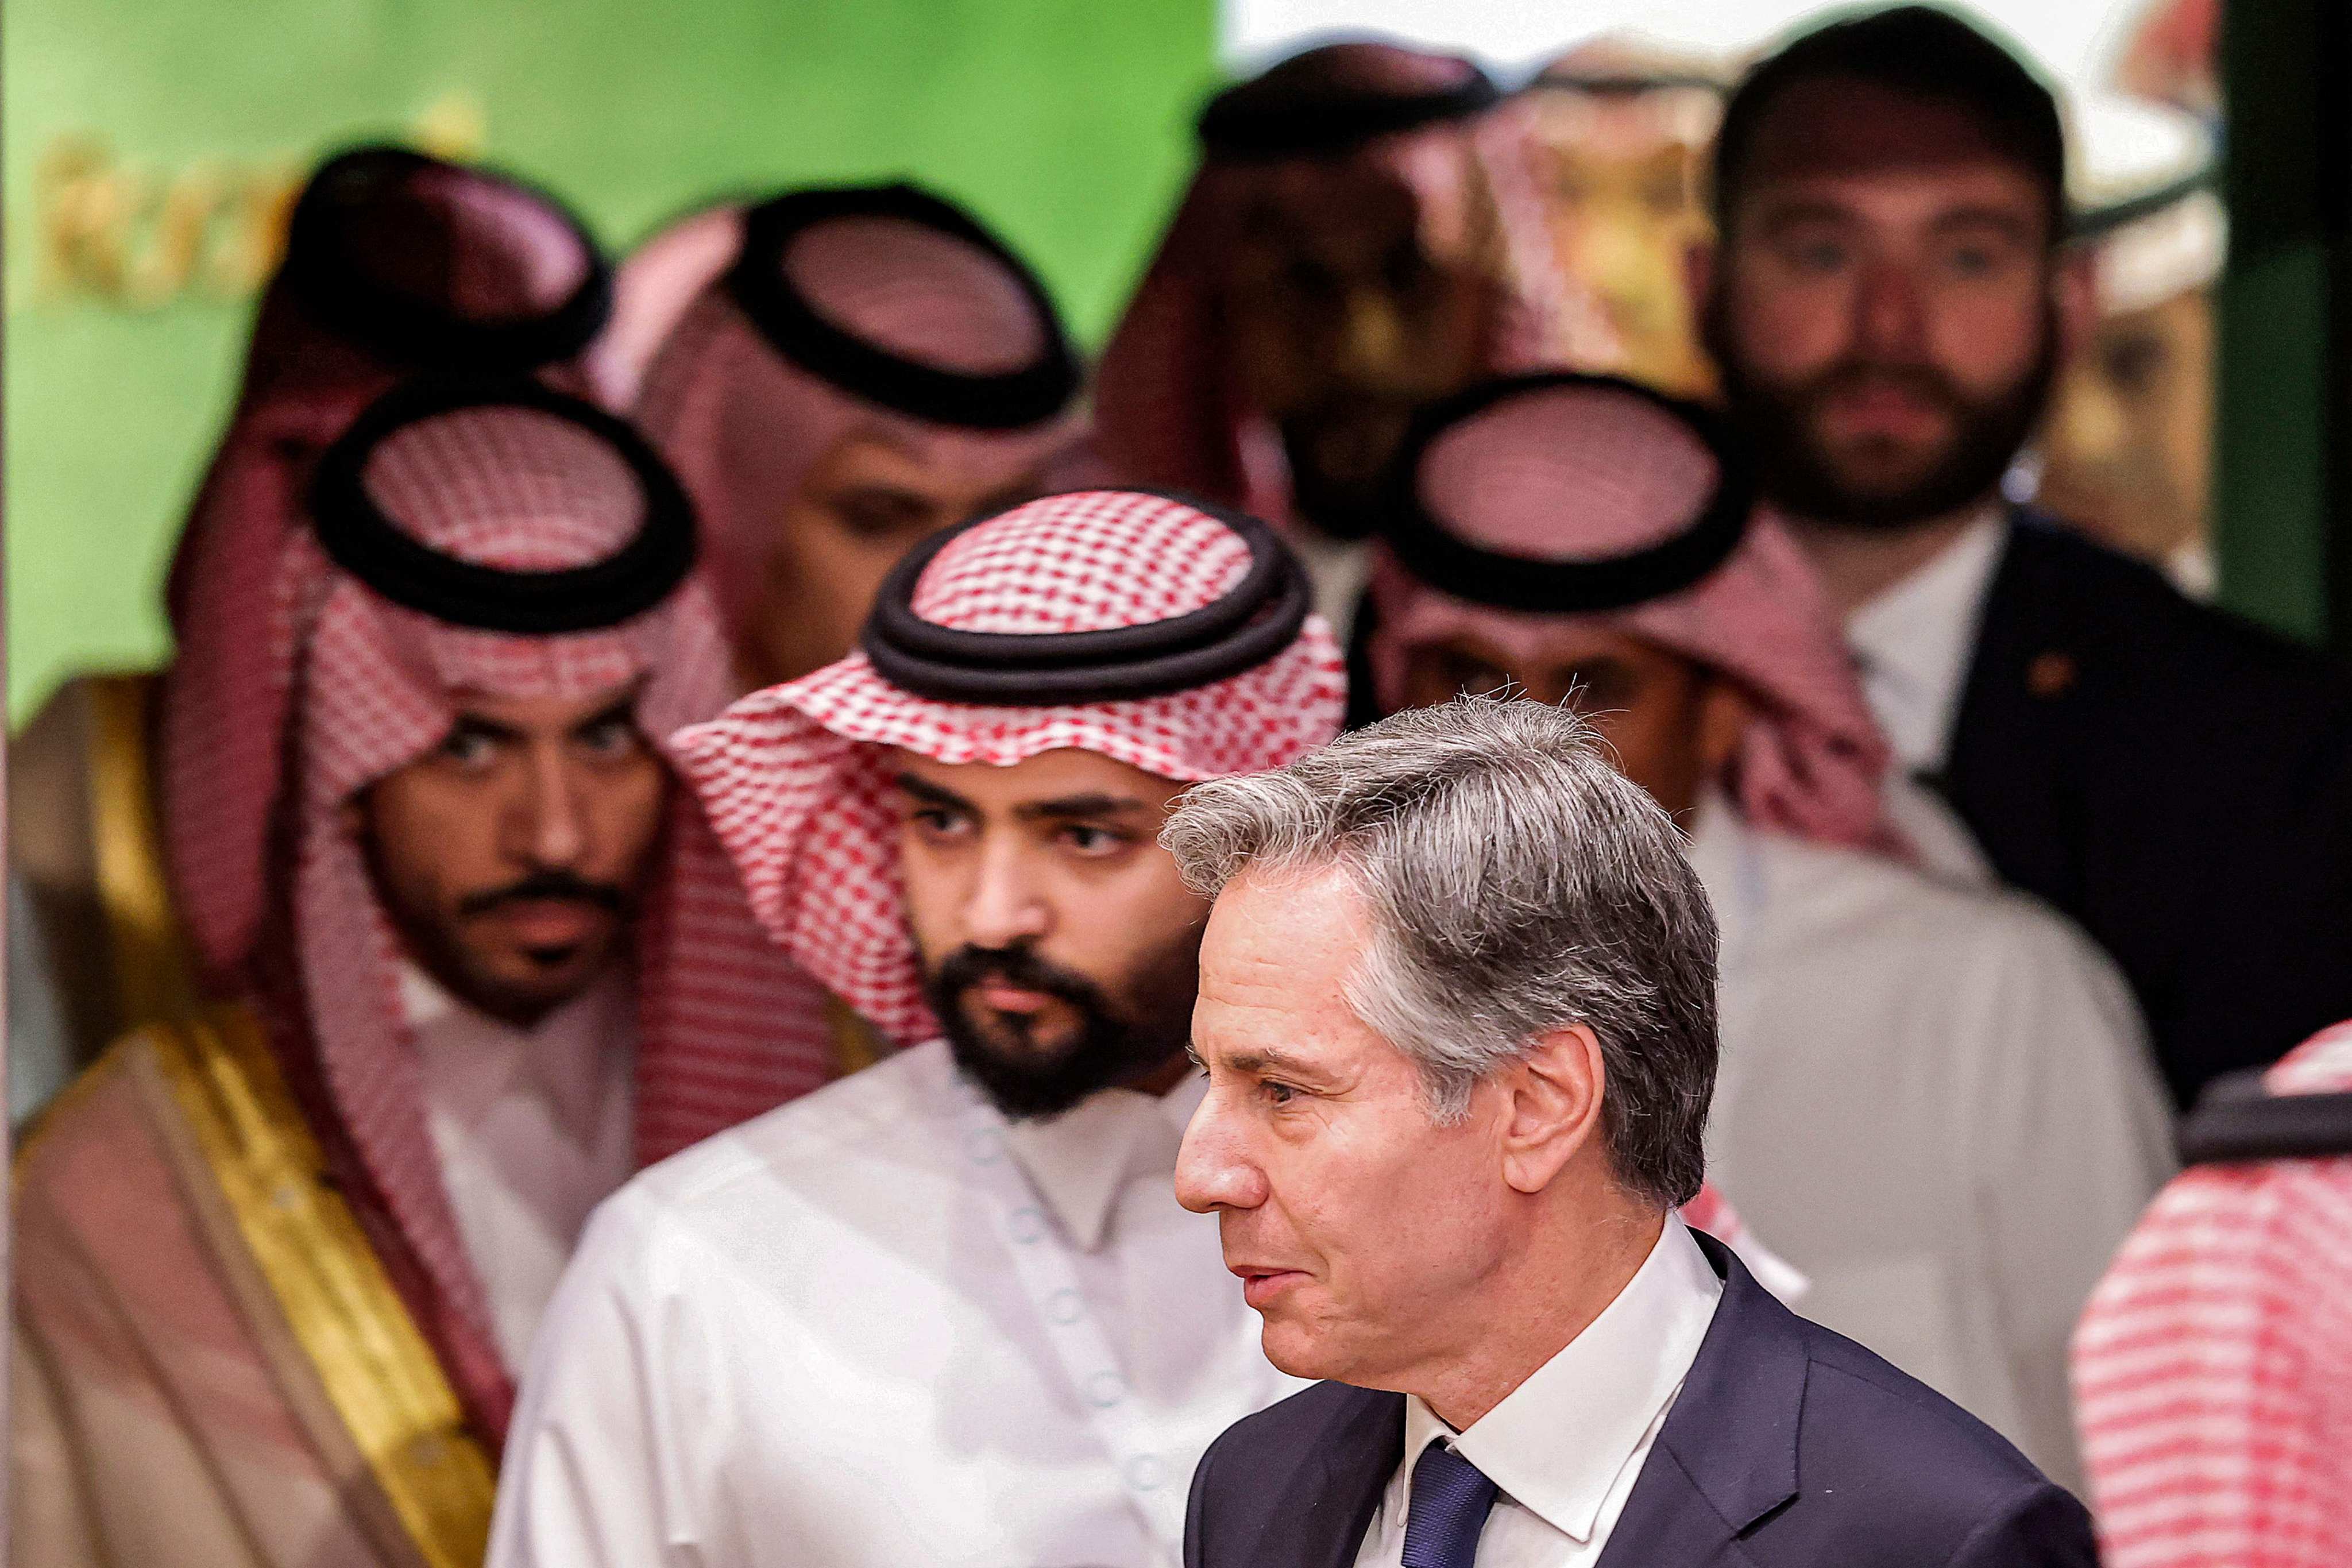 US Secretary of State Antony Blinken in Riyadh last week, the second top US official to visit Saudi Arabia within a month. Photo: AFP